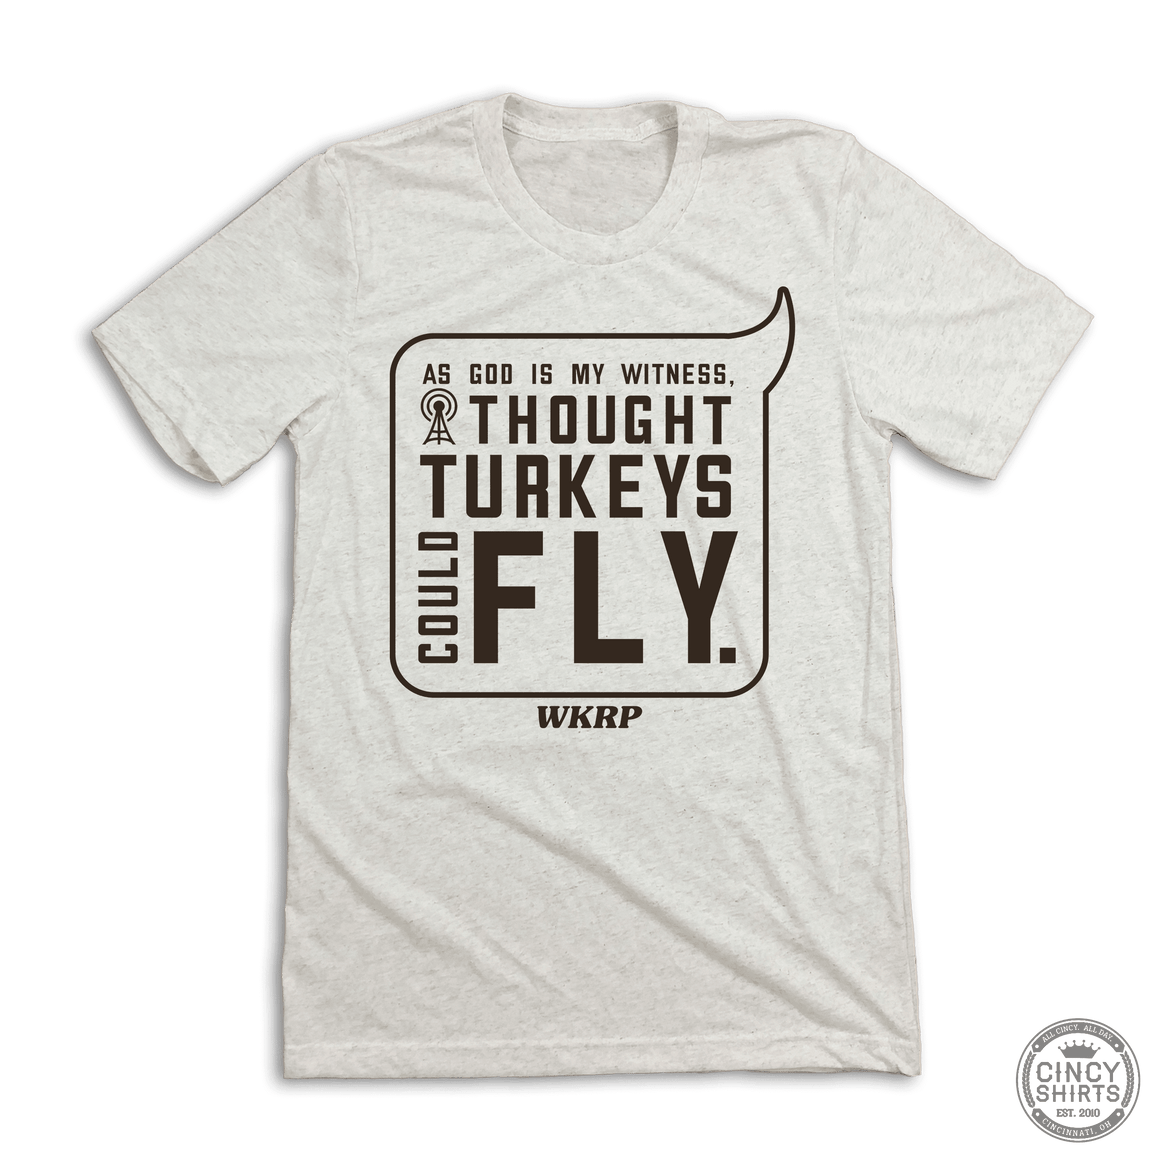 "I Thought Turkeys Could Fly" - WKRP - Cincy Shirts